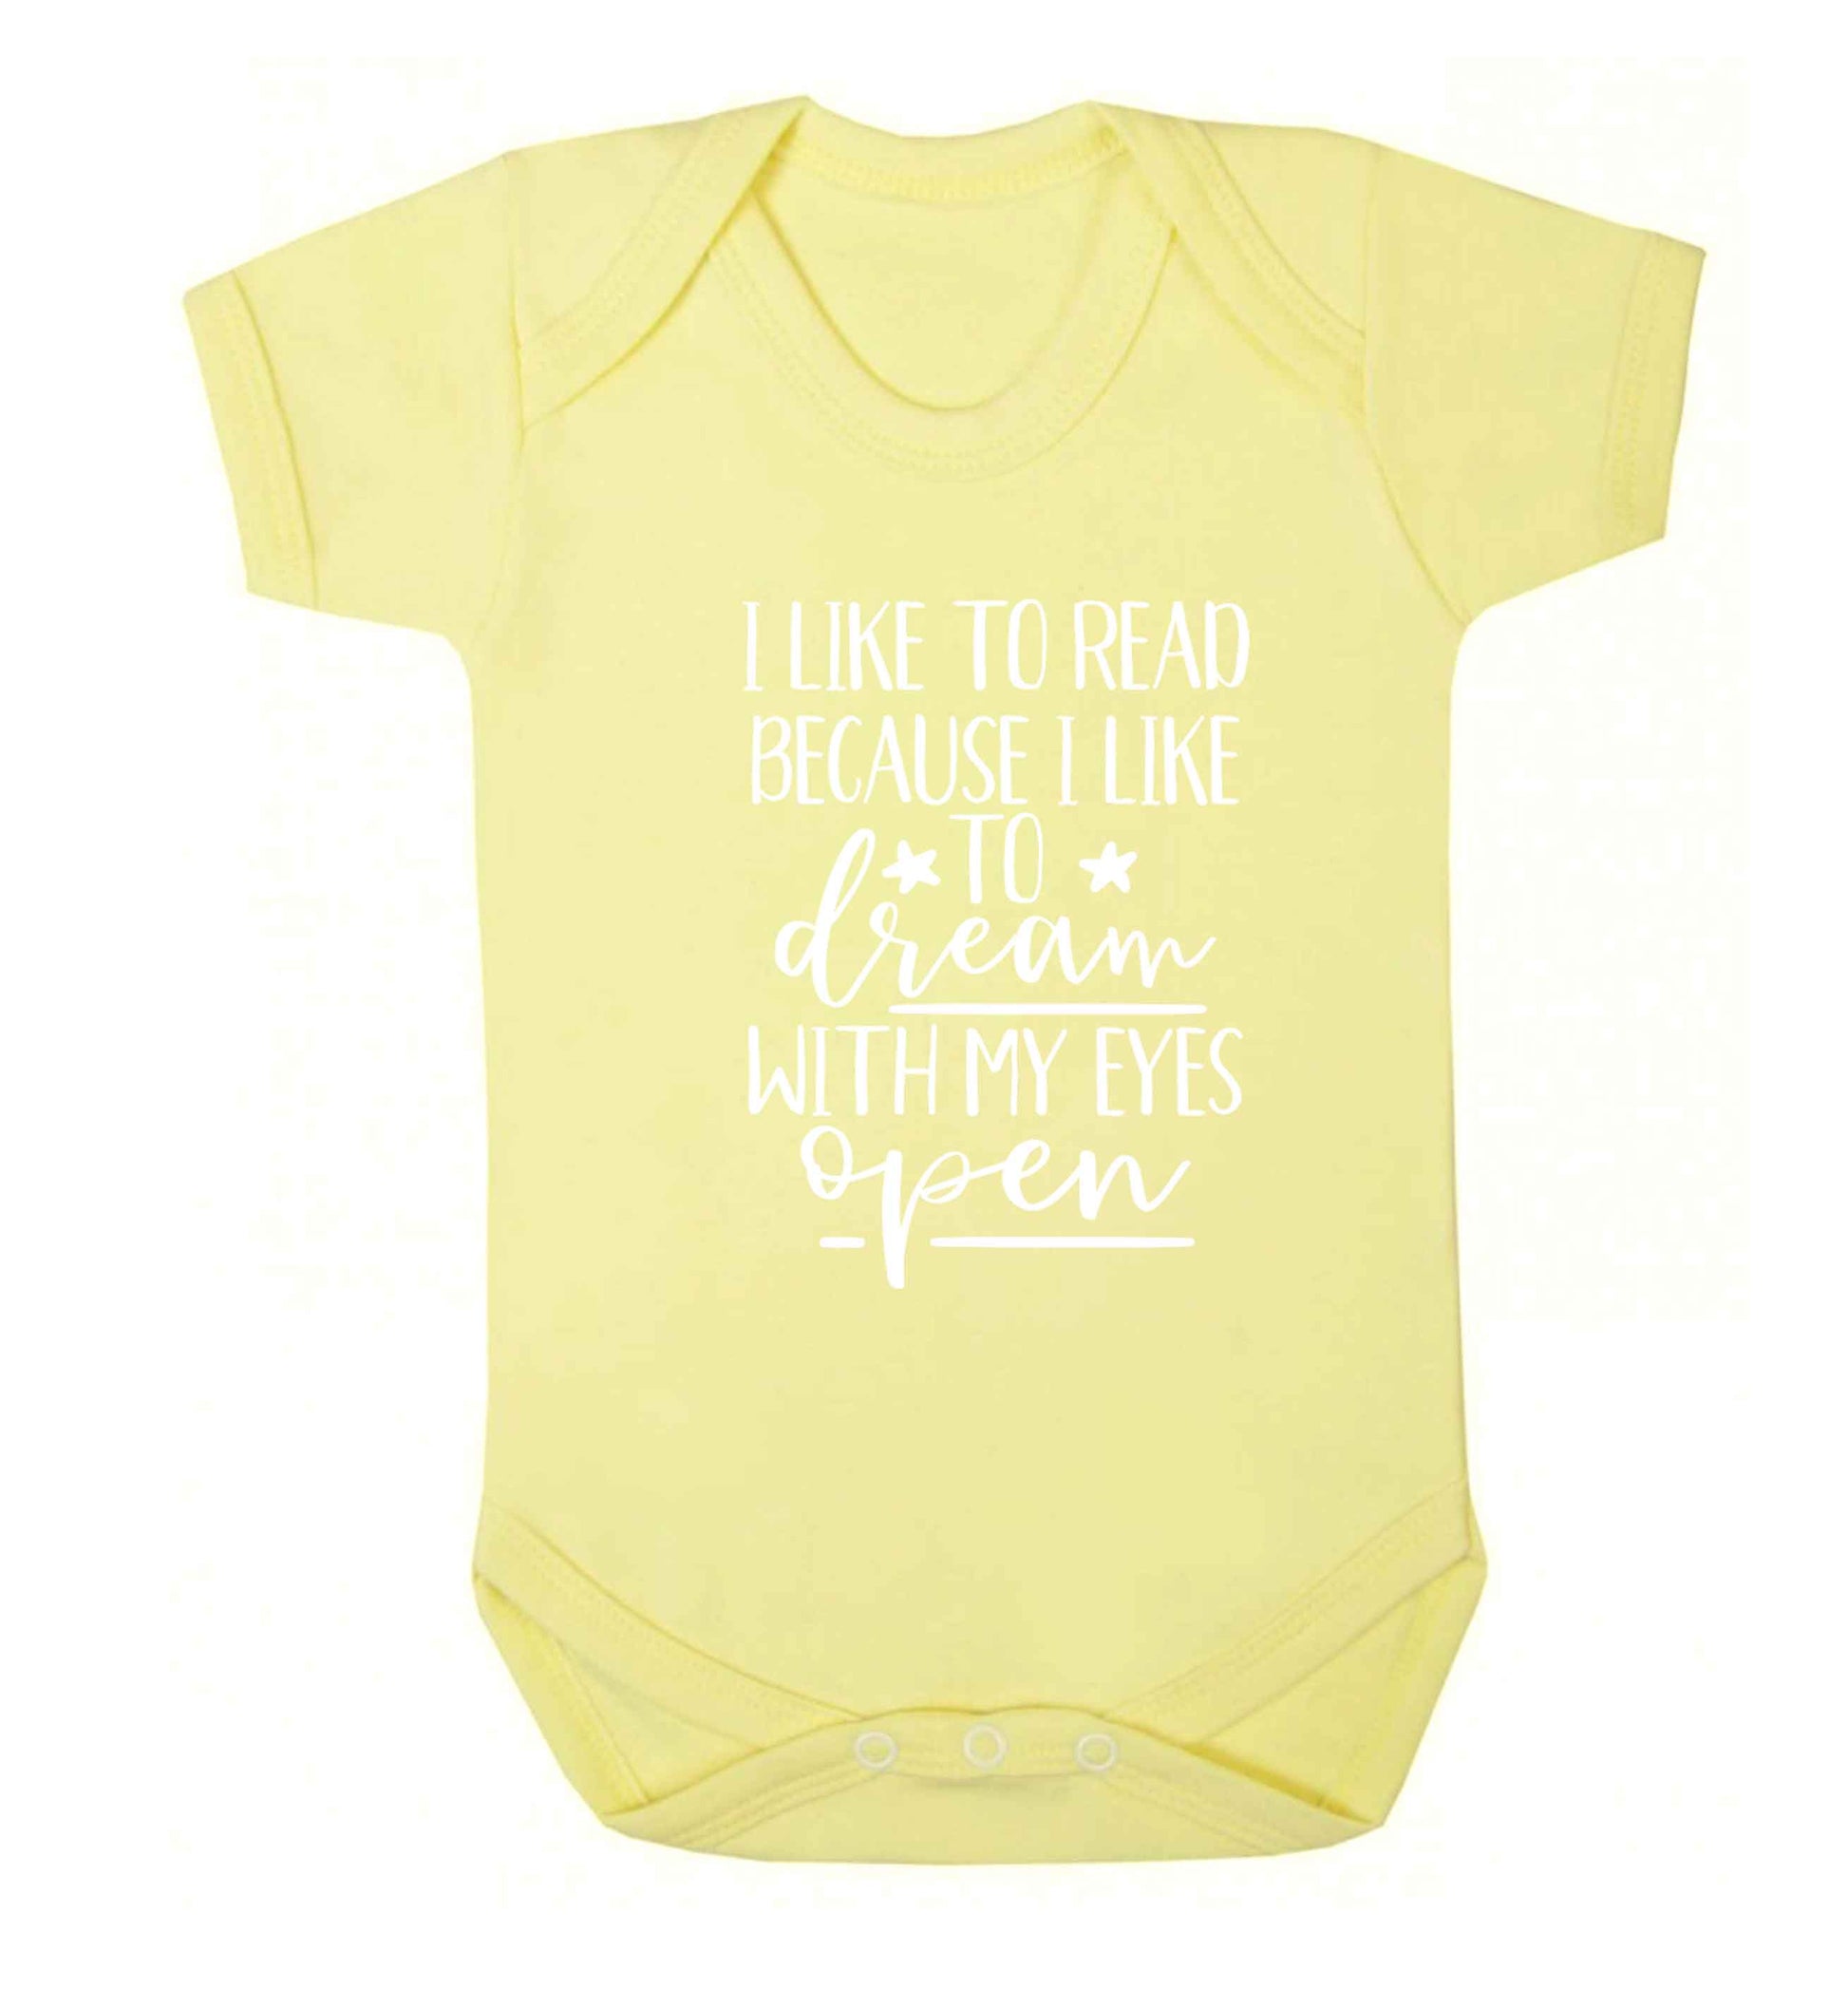 I like to read because I like to dream with my eyes open Baby Vest pale yellow 18-24 months